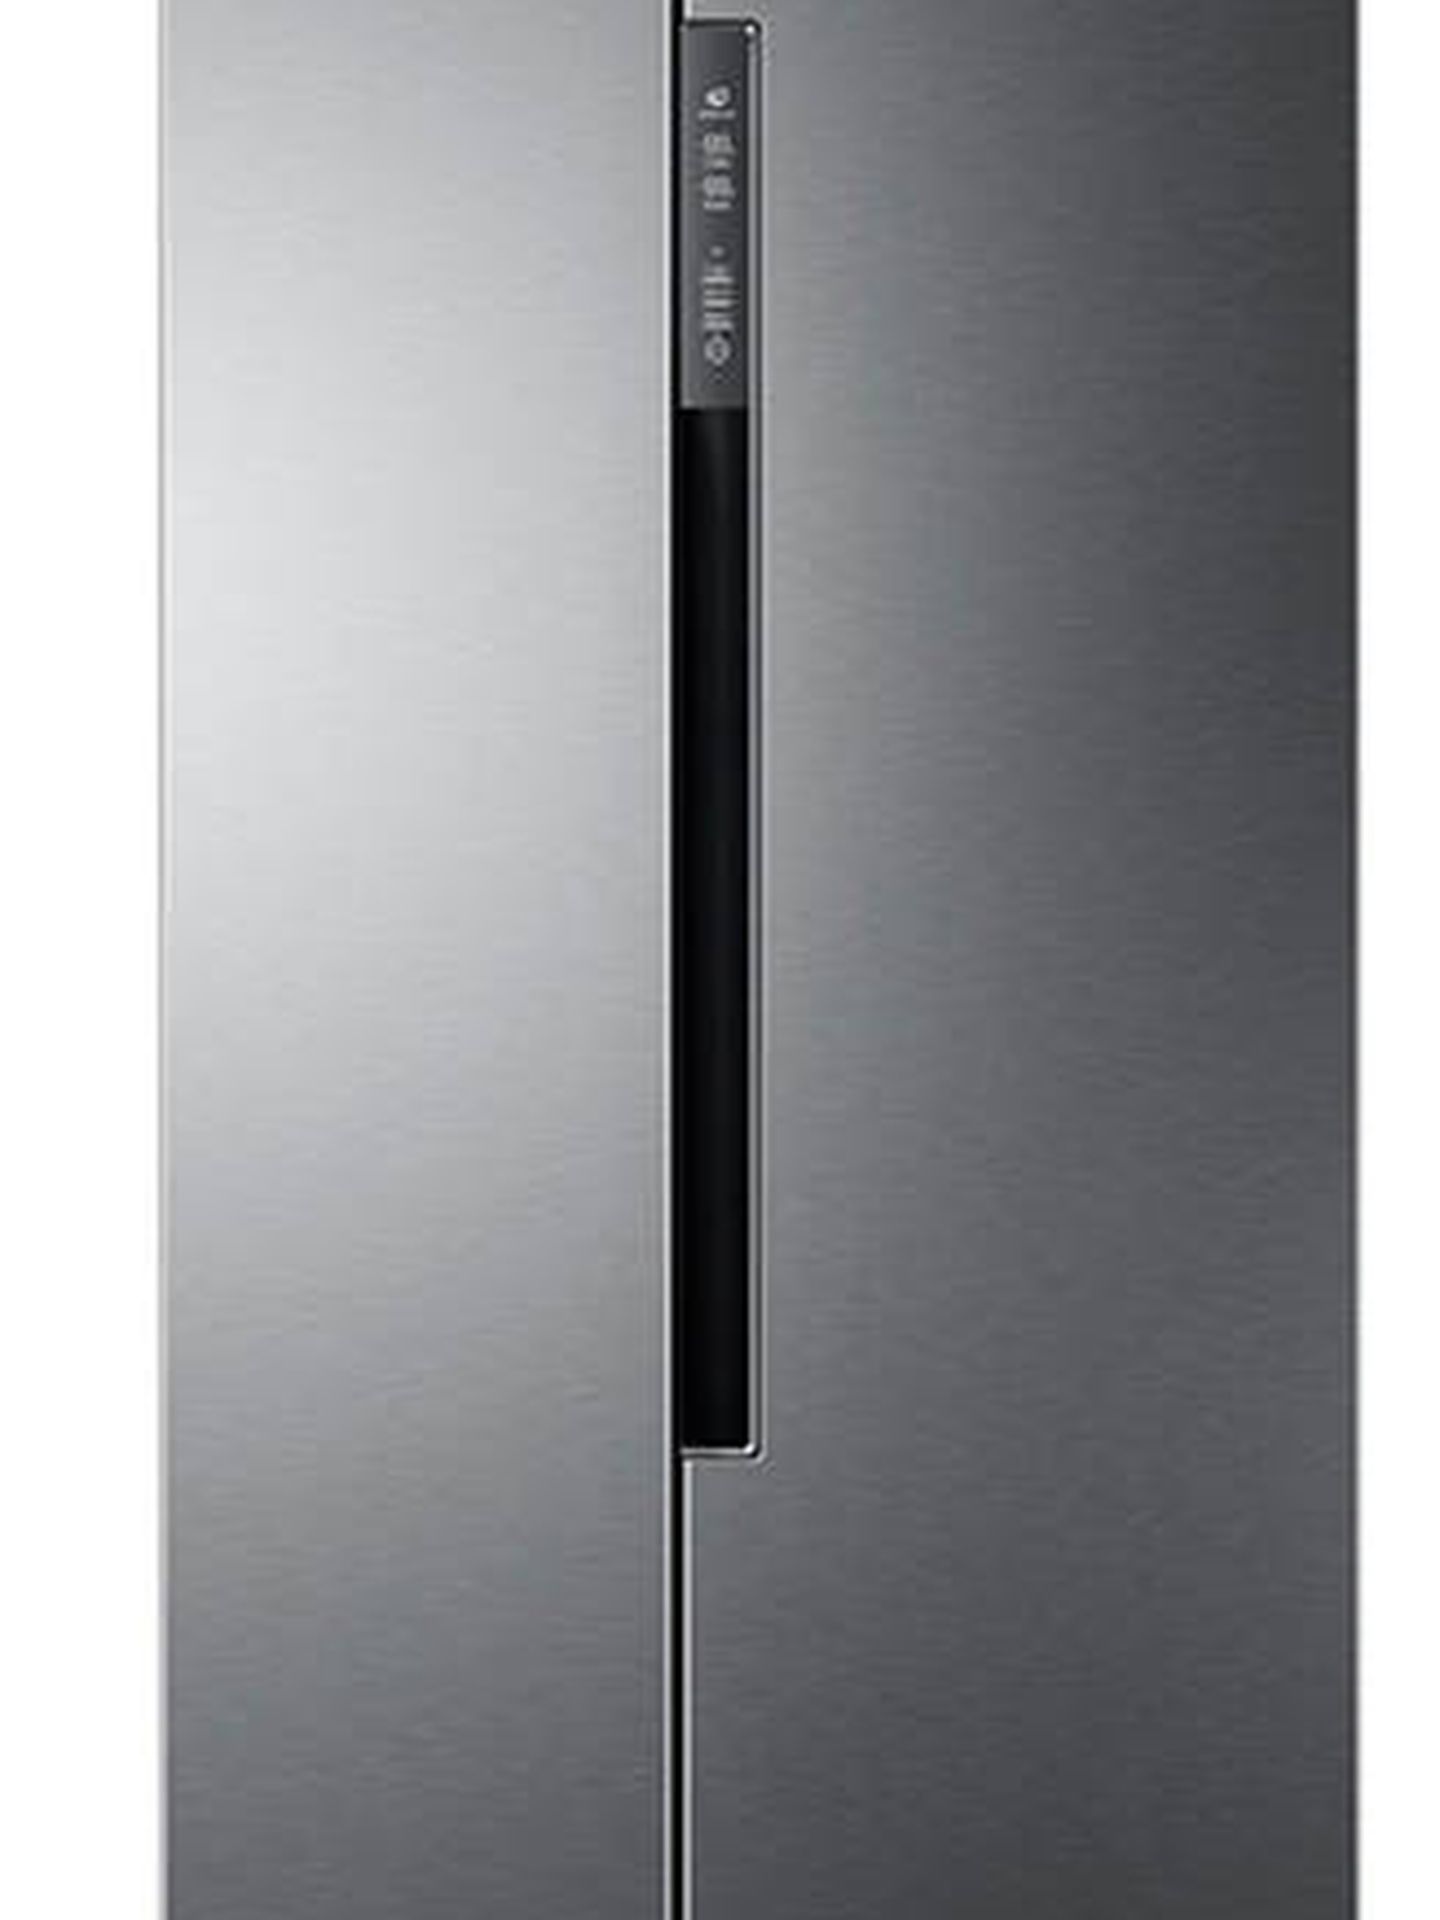 Frigorífico Side by Side Haier HRF-522DG7 Total No Frost: 699,55€ (antes 1049 €) Descuento 33%